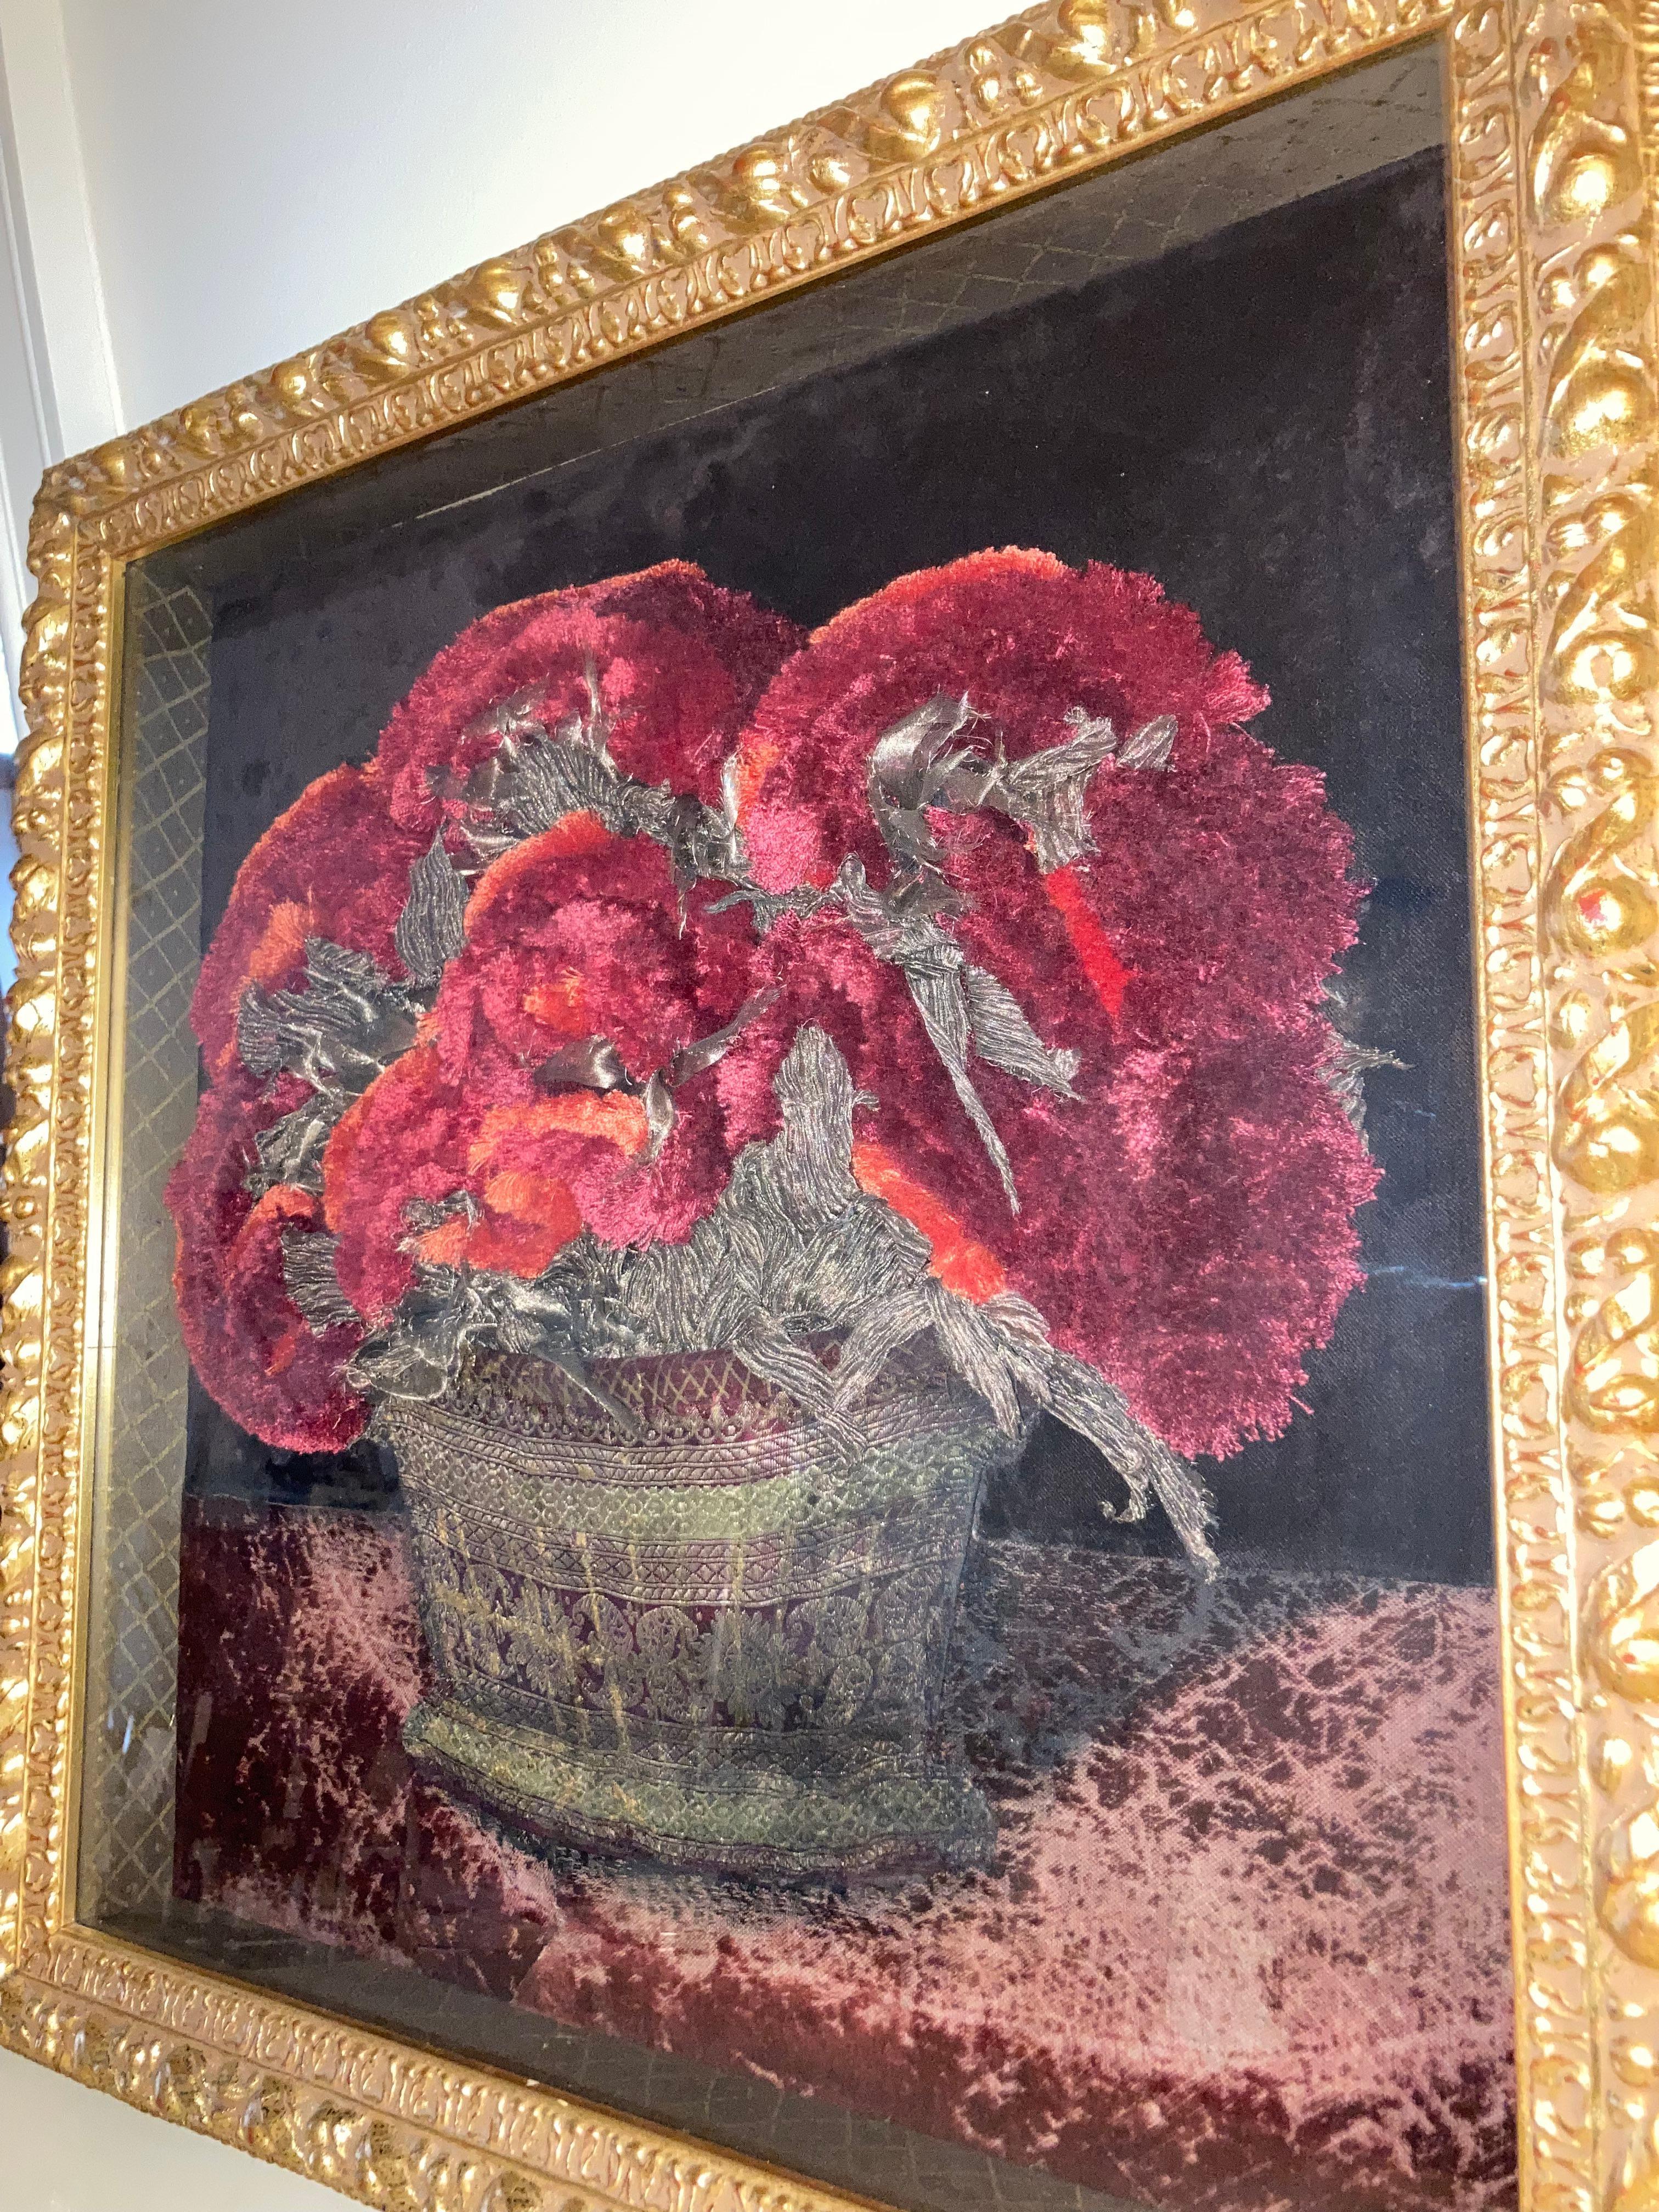 Incredibly crafted shadow box artwork by renowned Italian artist Patrizia Medail. ?The artist’s works are created with antique fabric fragments and other mixed media such as old prints, musical scores, cotton fringes, pieces of ancient rugs , straw,